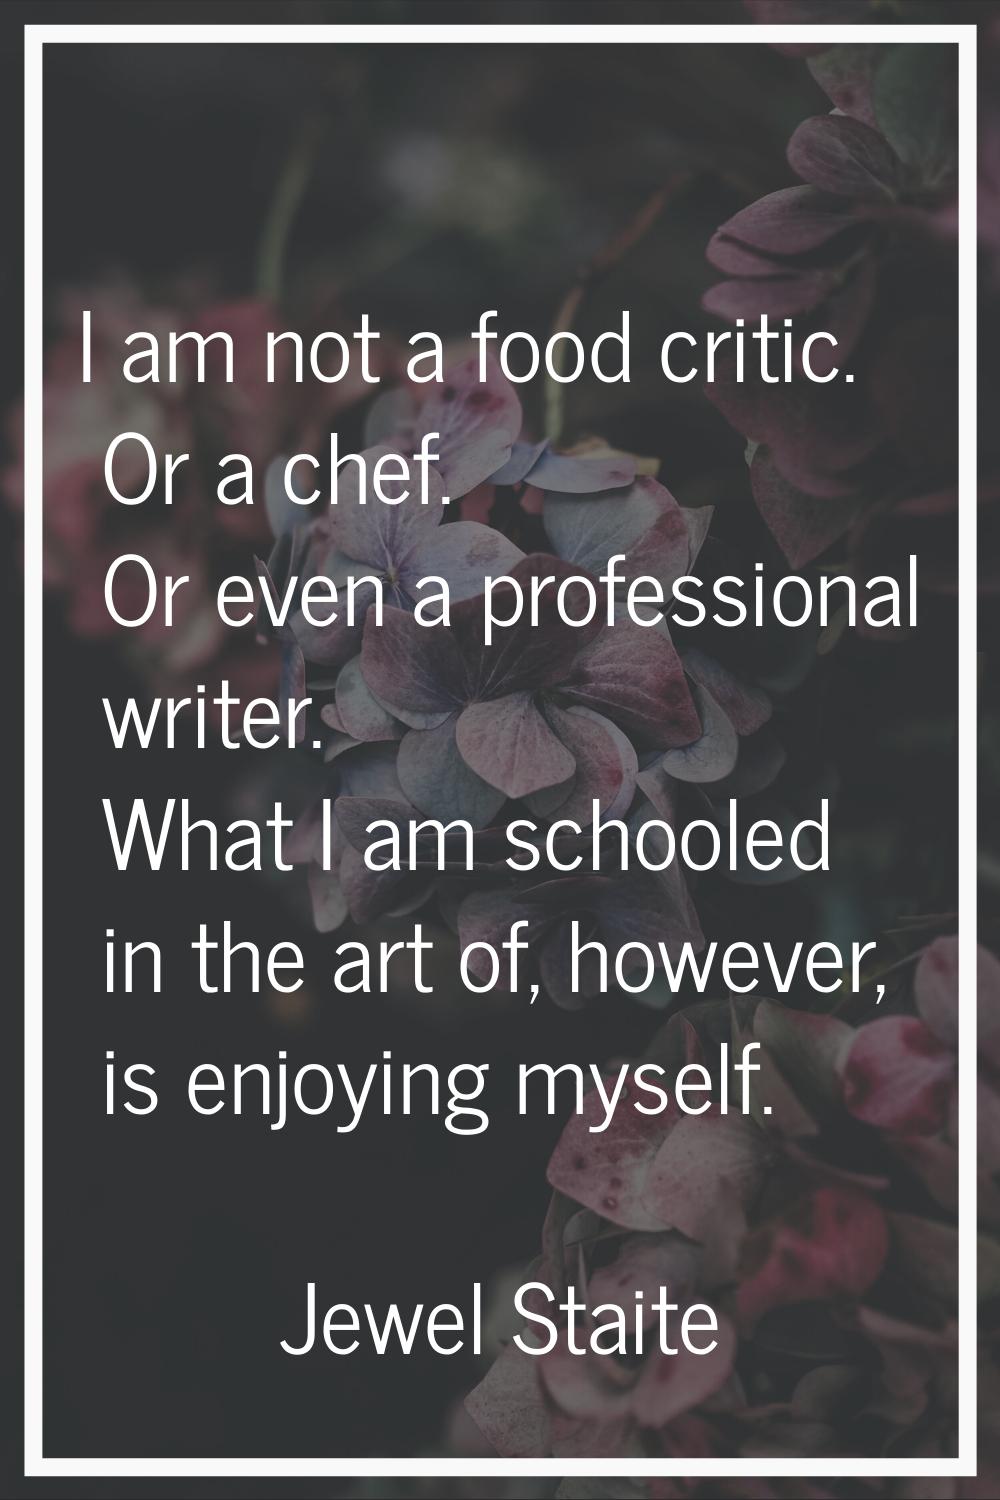 I am not a food critic. Or a chef. Or even a professional writer. What I am schooled in the art of,